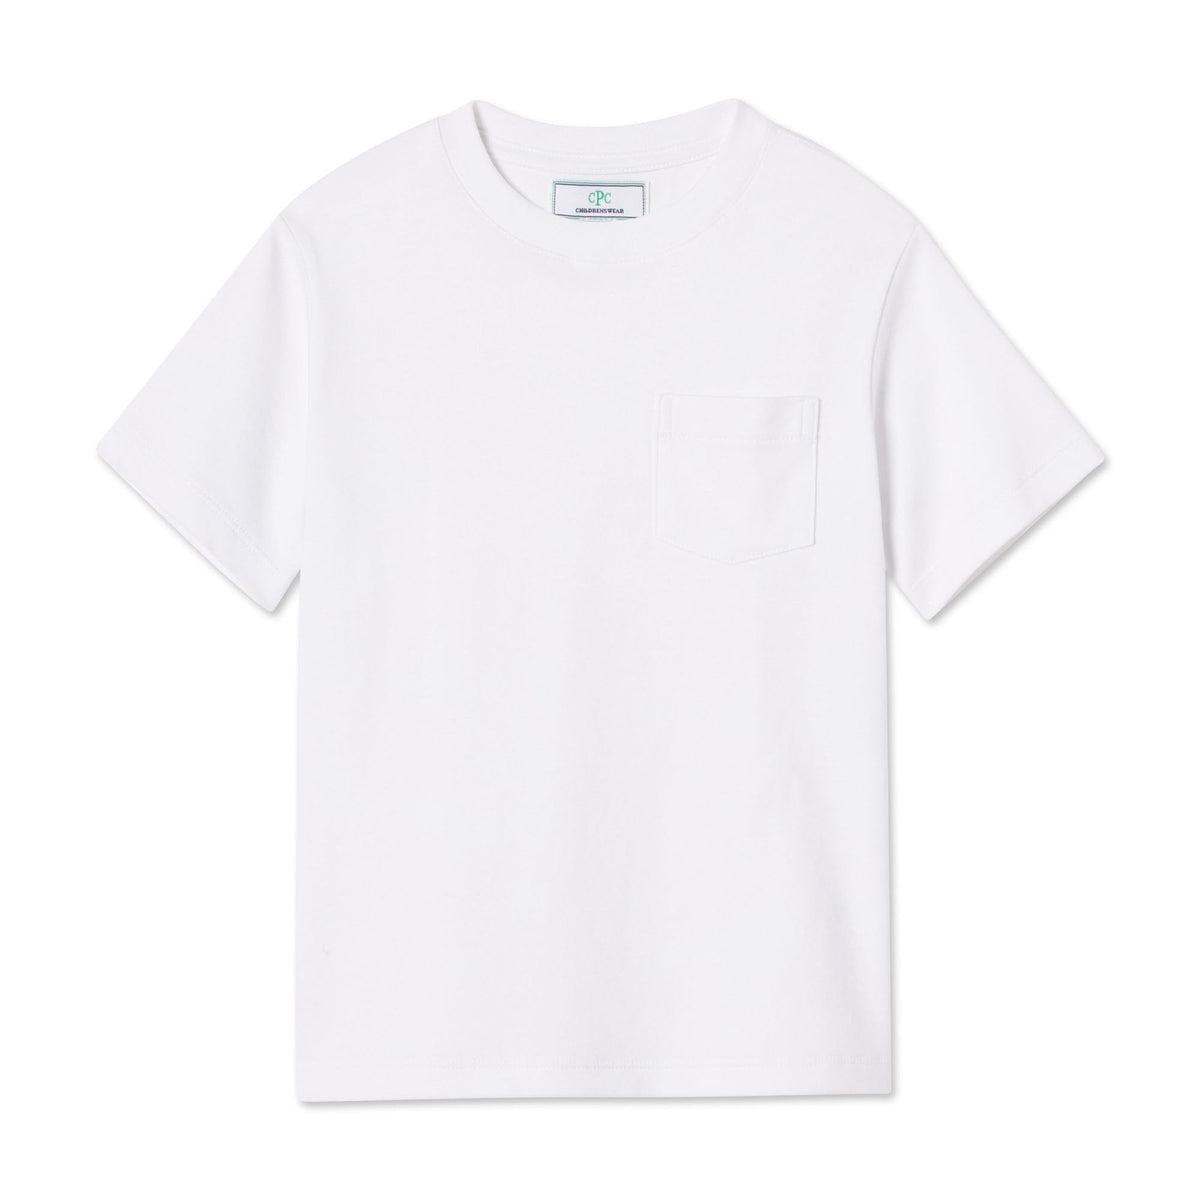 Classic and Preppy Kellan Short Sleeve Pocket Tee, Bright White-Shirts and Tops-Bright White-12-18M-CPC - Classic Prep Childrenswear